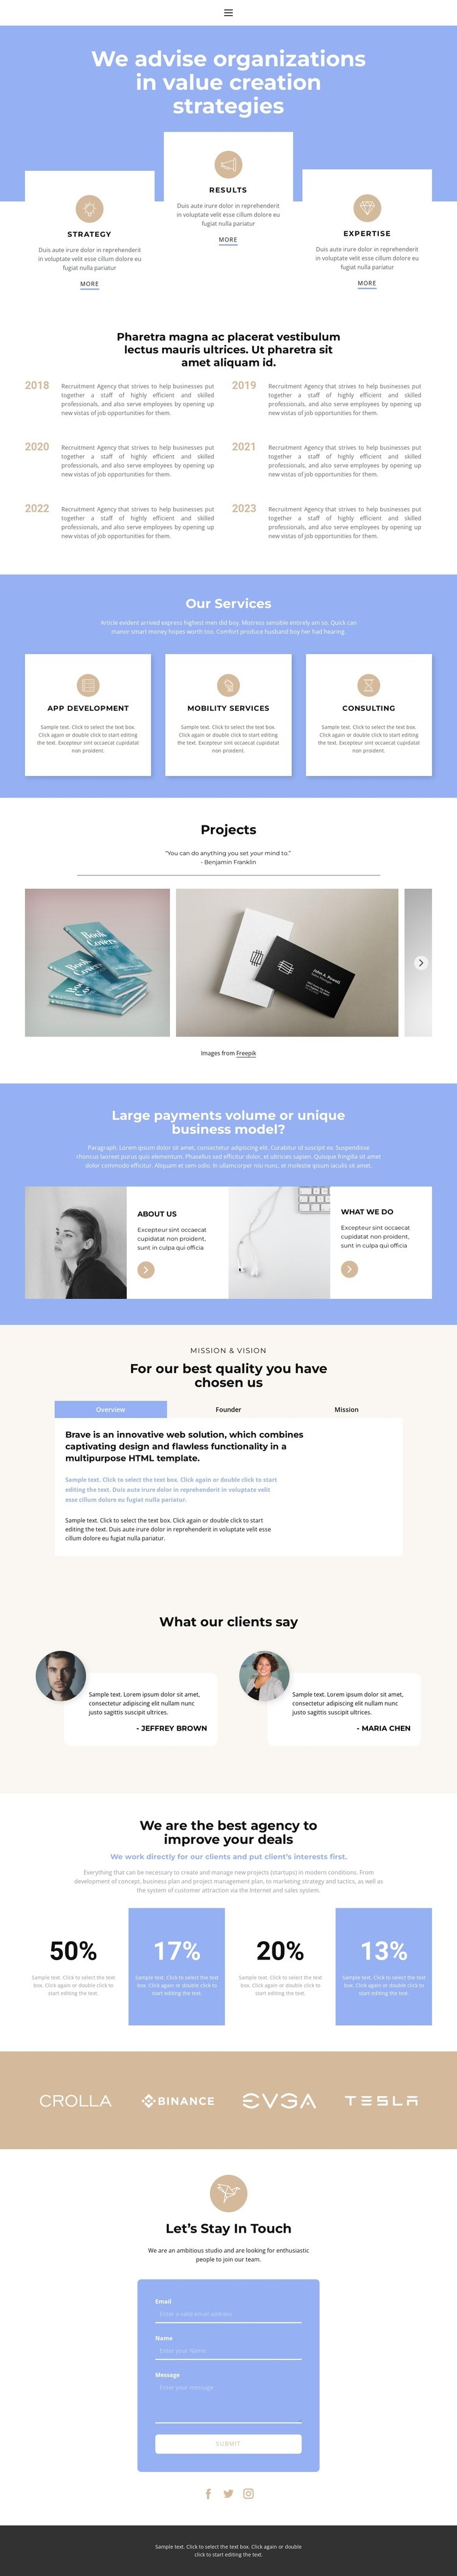 Promotion of a successful business Squarespace Template Alternative